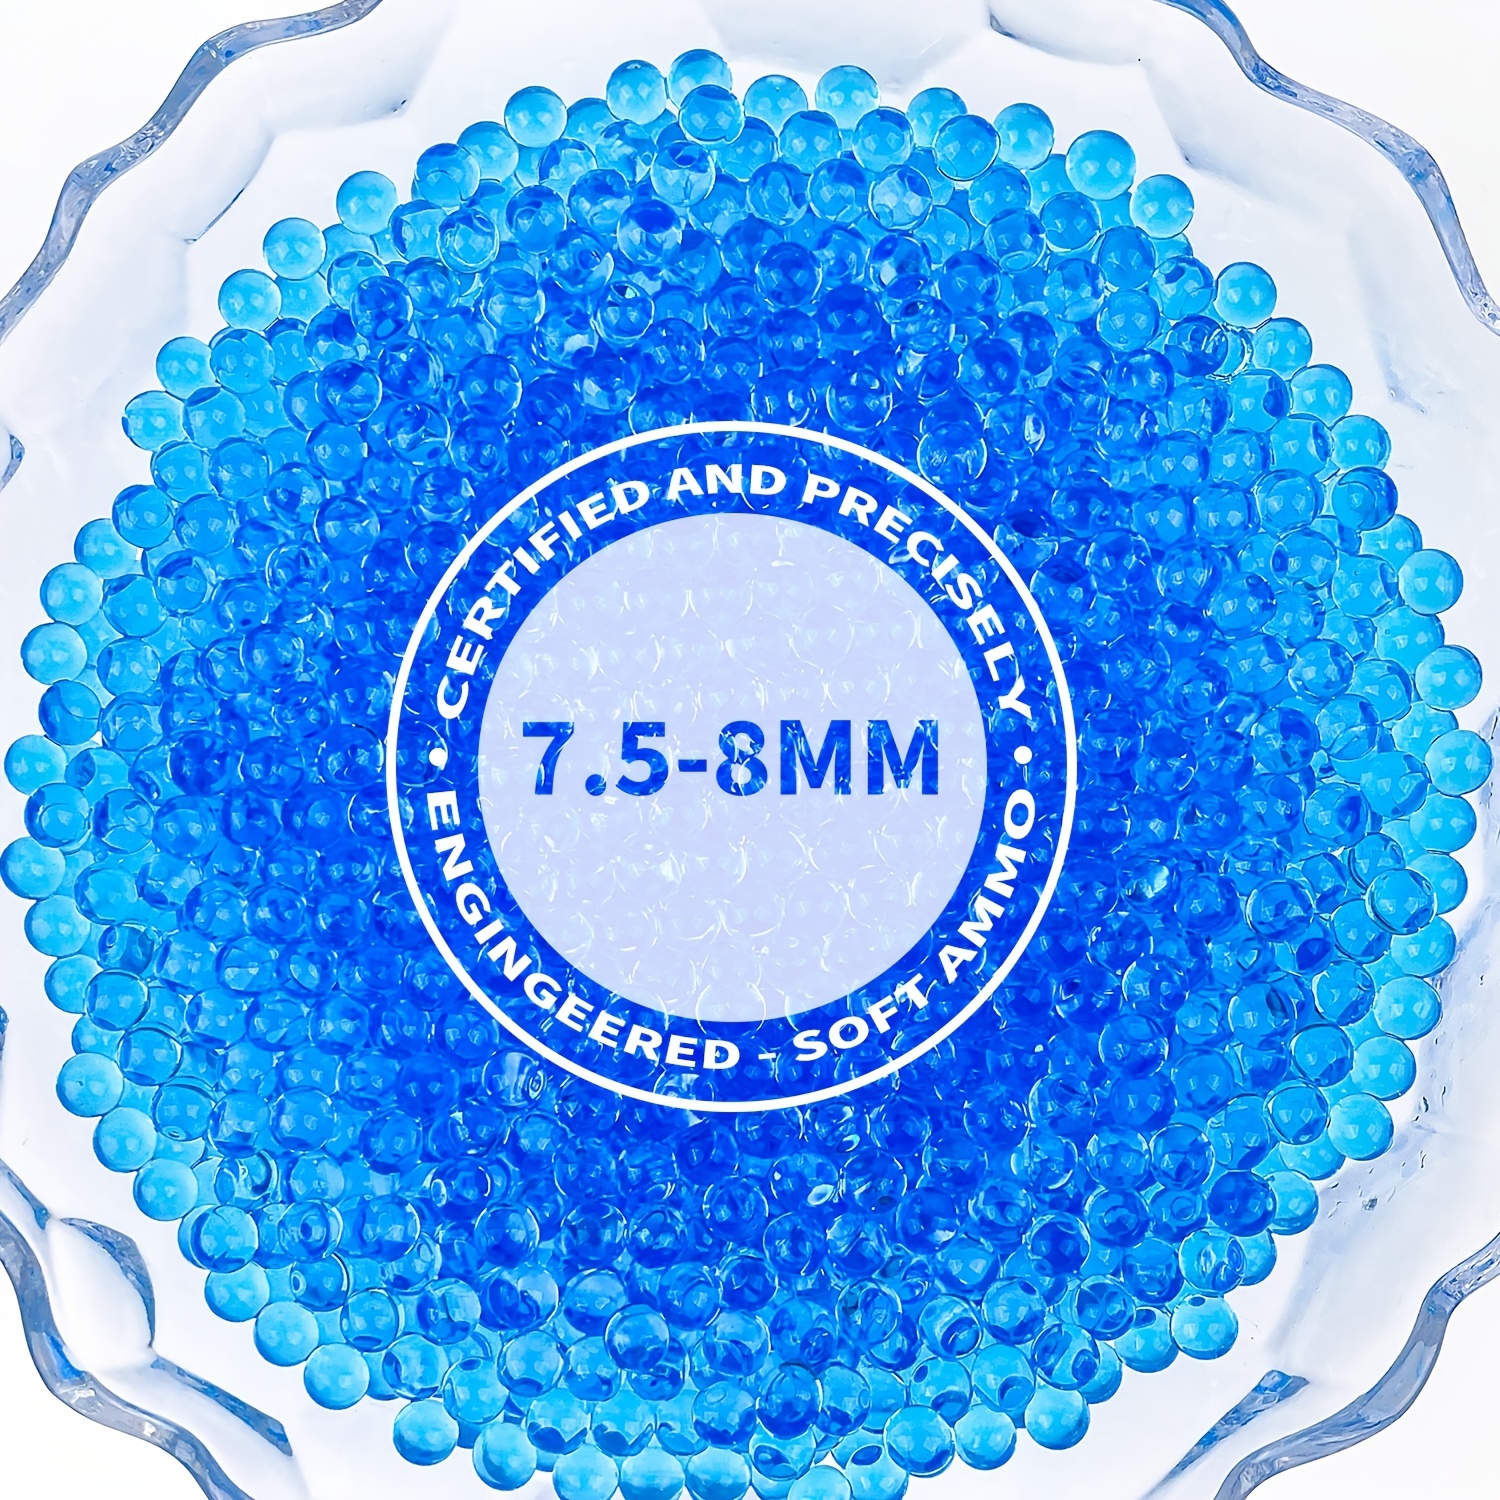 Gel Balls Blaster Refill Ammo 7 8 Mm 30000 Pieces Per Bottle Water Balls Beads Bullets Made Of Non Toxic Eco Friendly Compatible With Electric Gel Balls Blaster